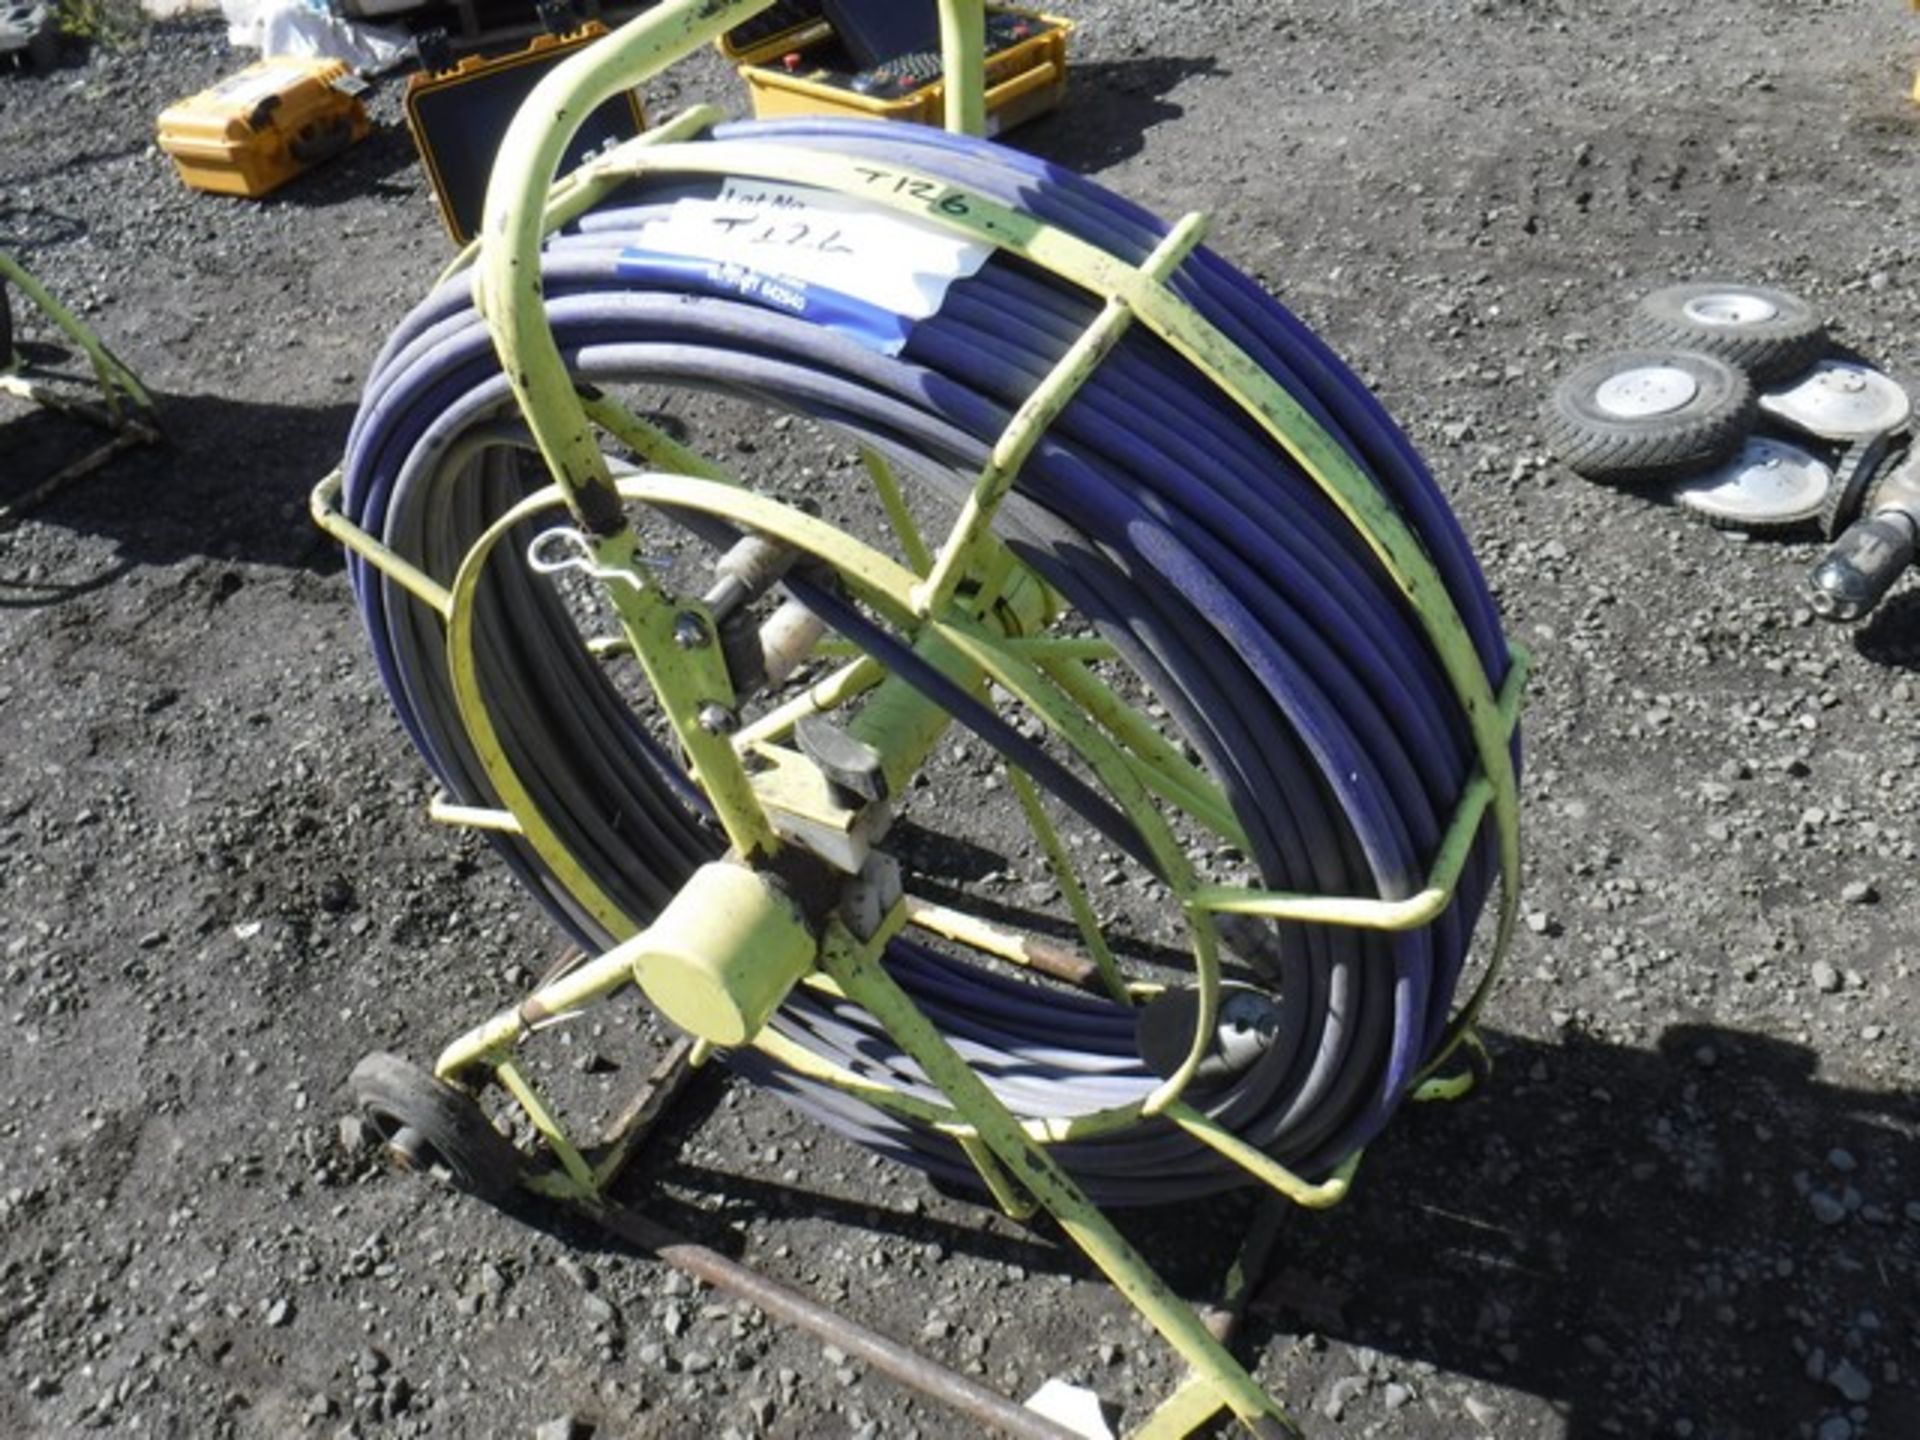 Optical drainage inspection cable on reel - Image 2 of 2